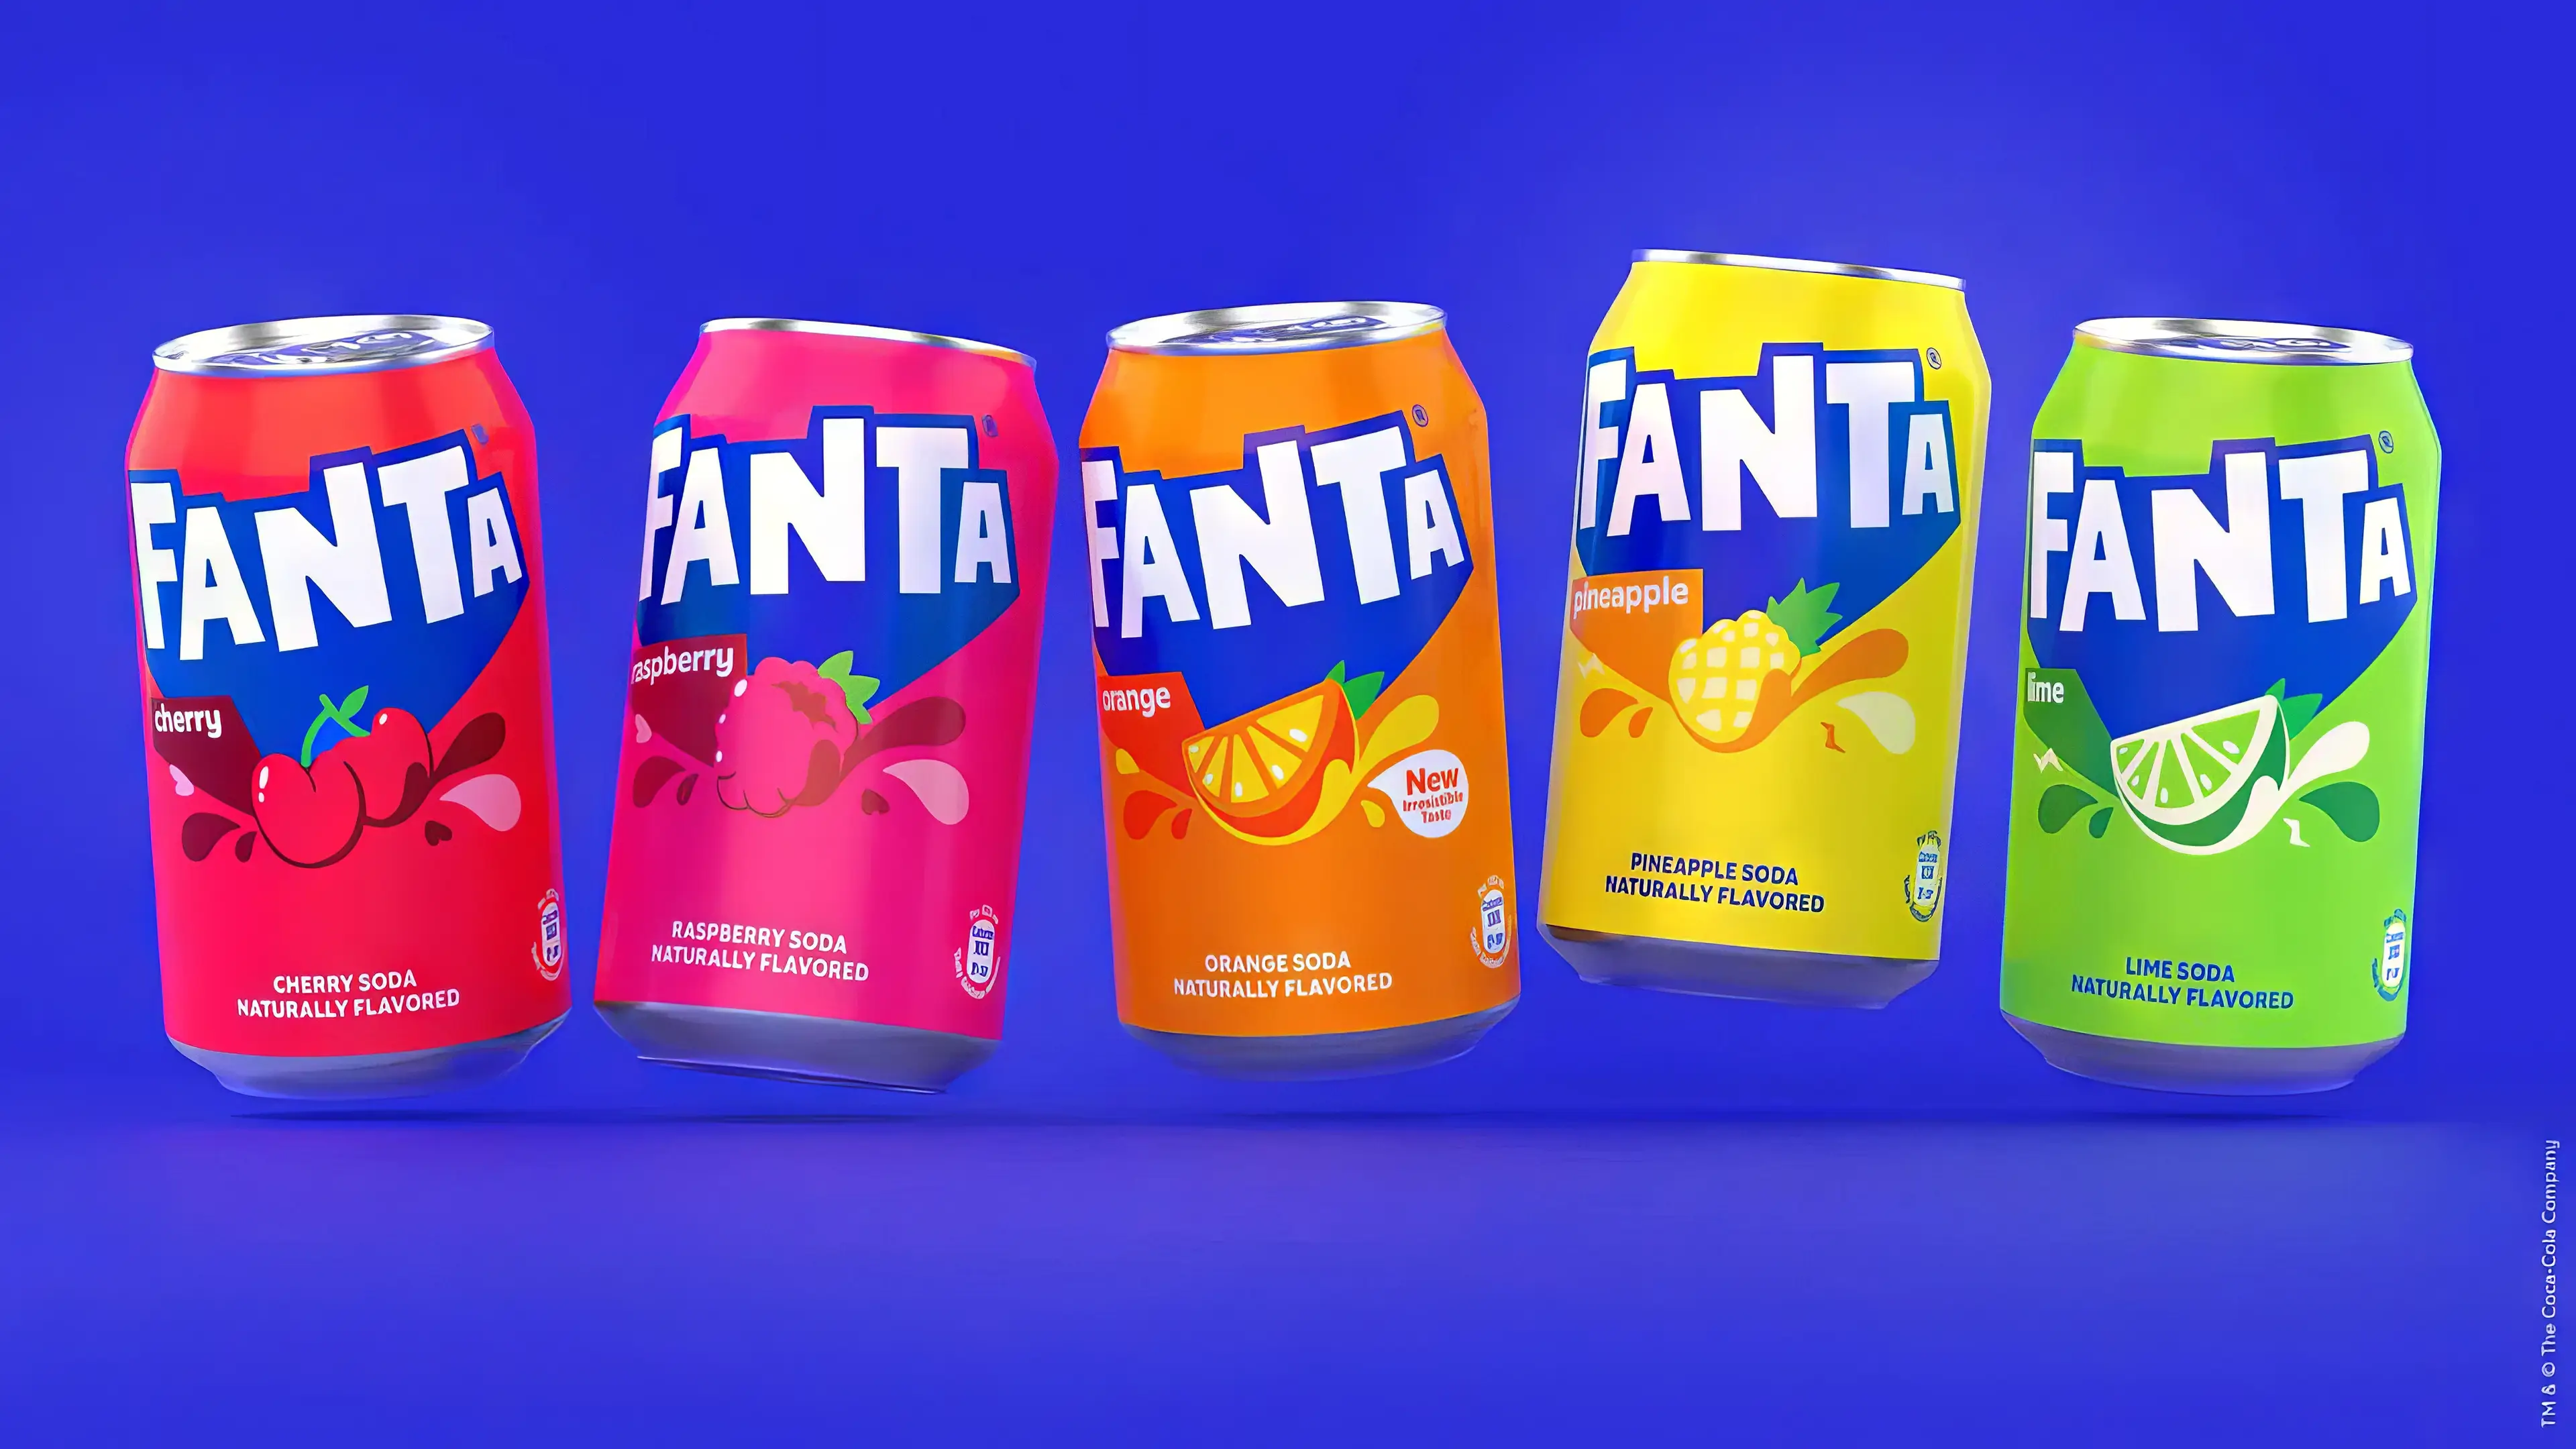 Fanta's 2023 Rebrand: A Bold New Look for the Iconic Soda